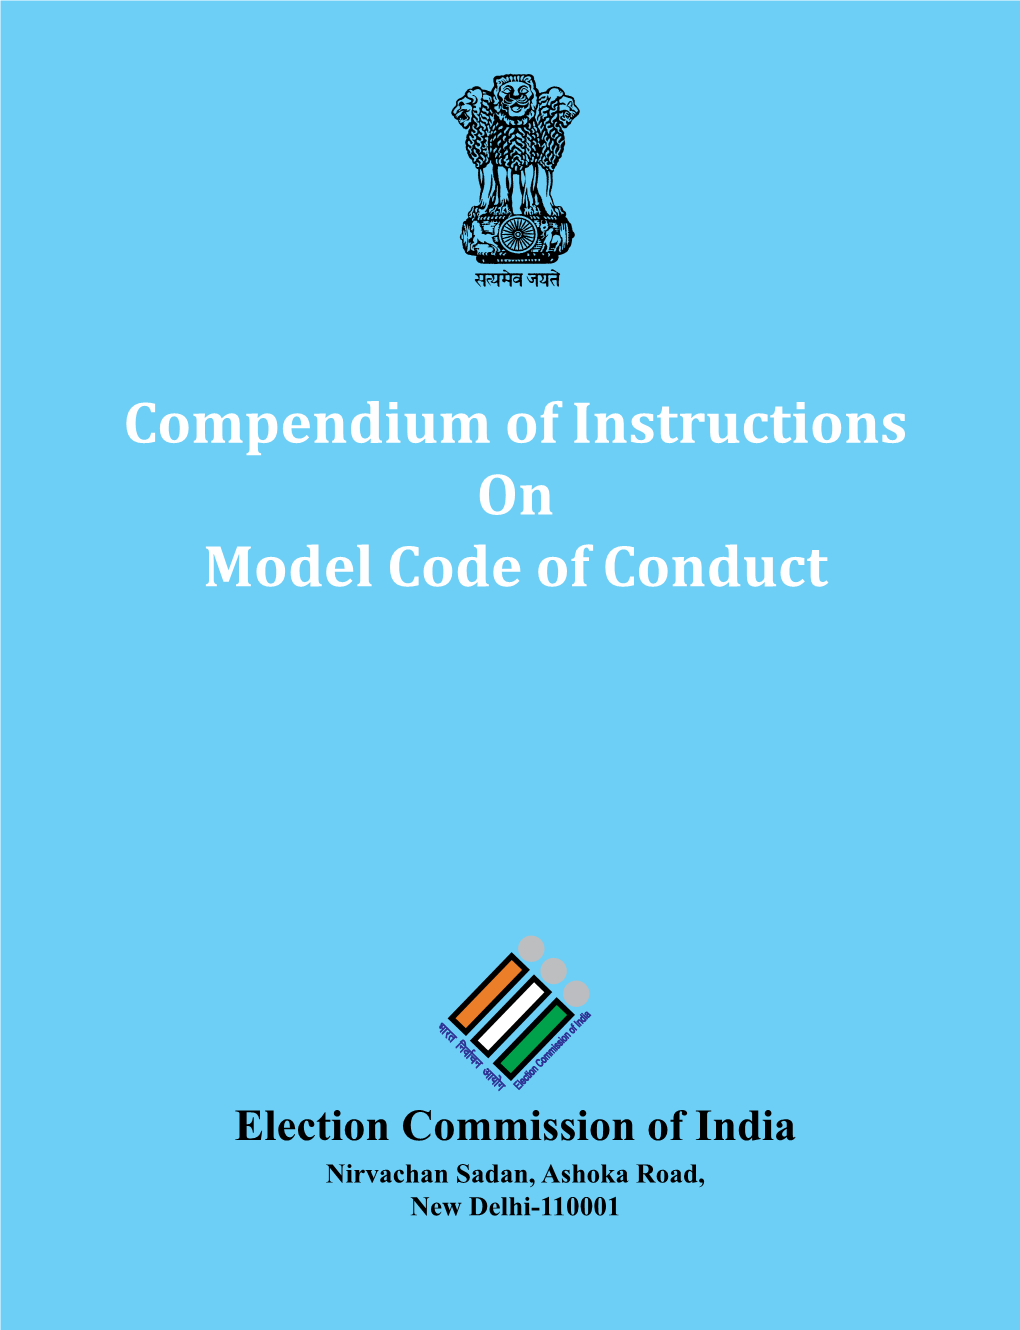 Compendium of Instructions on Model Code of Conduct